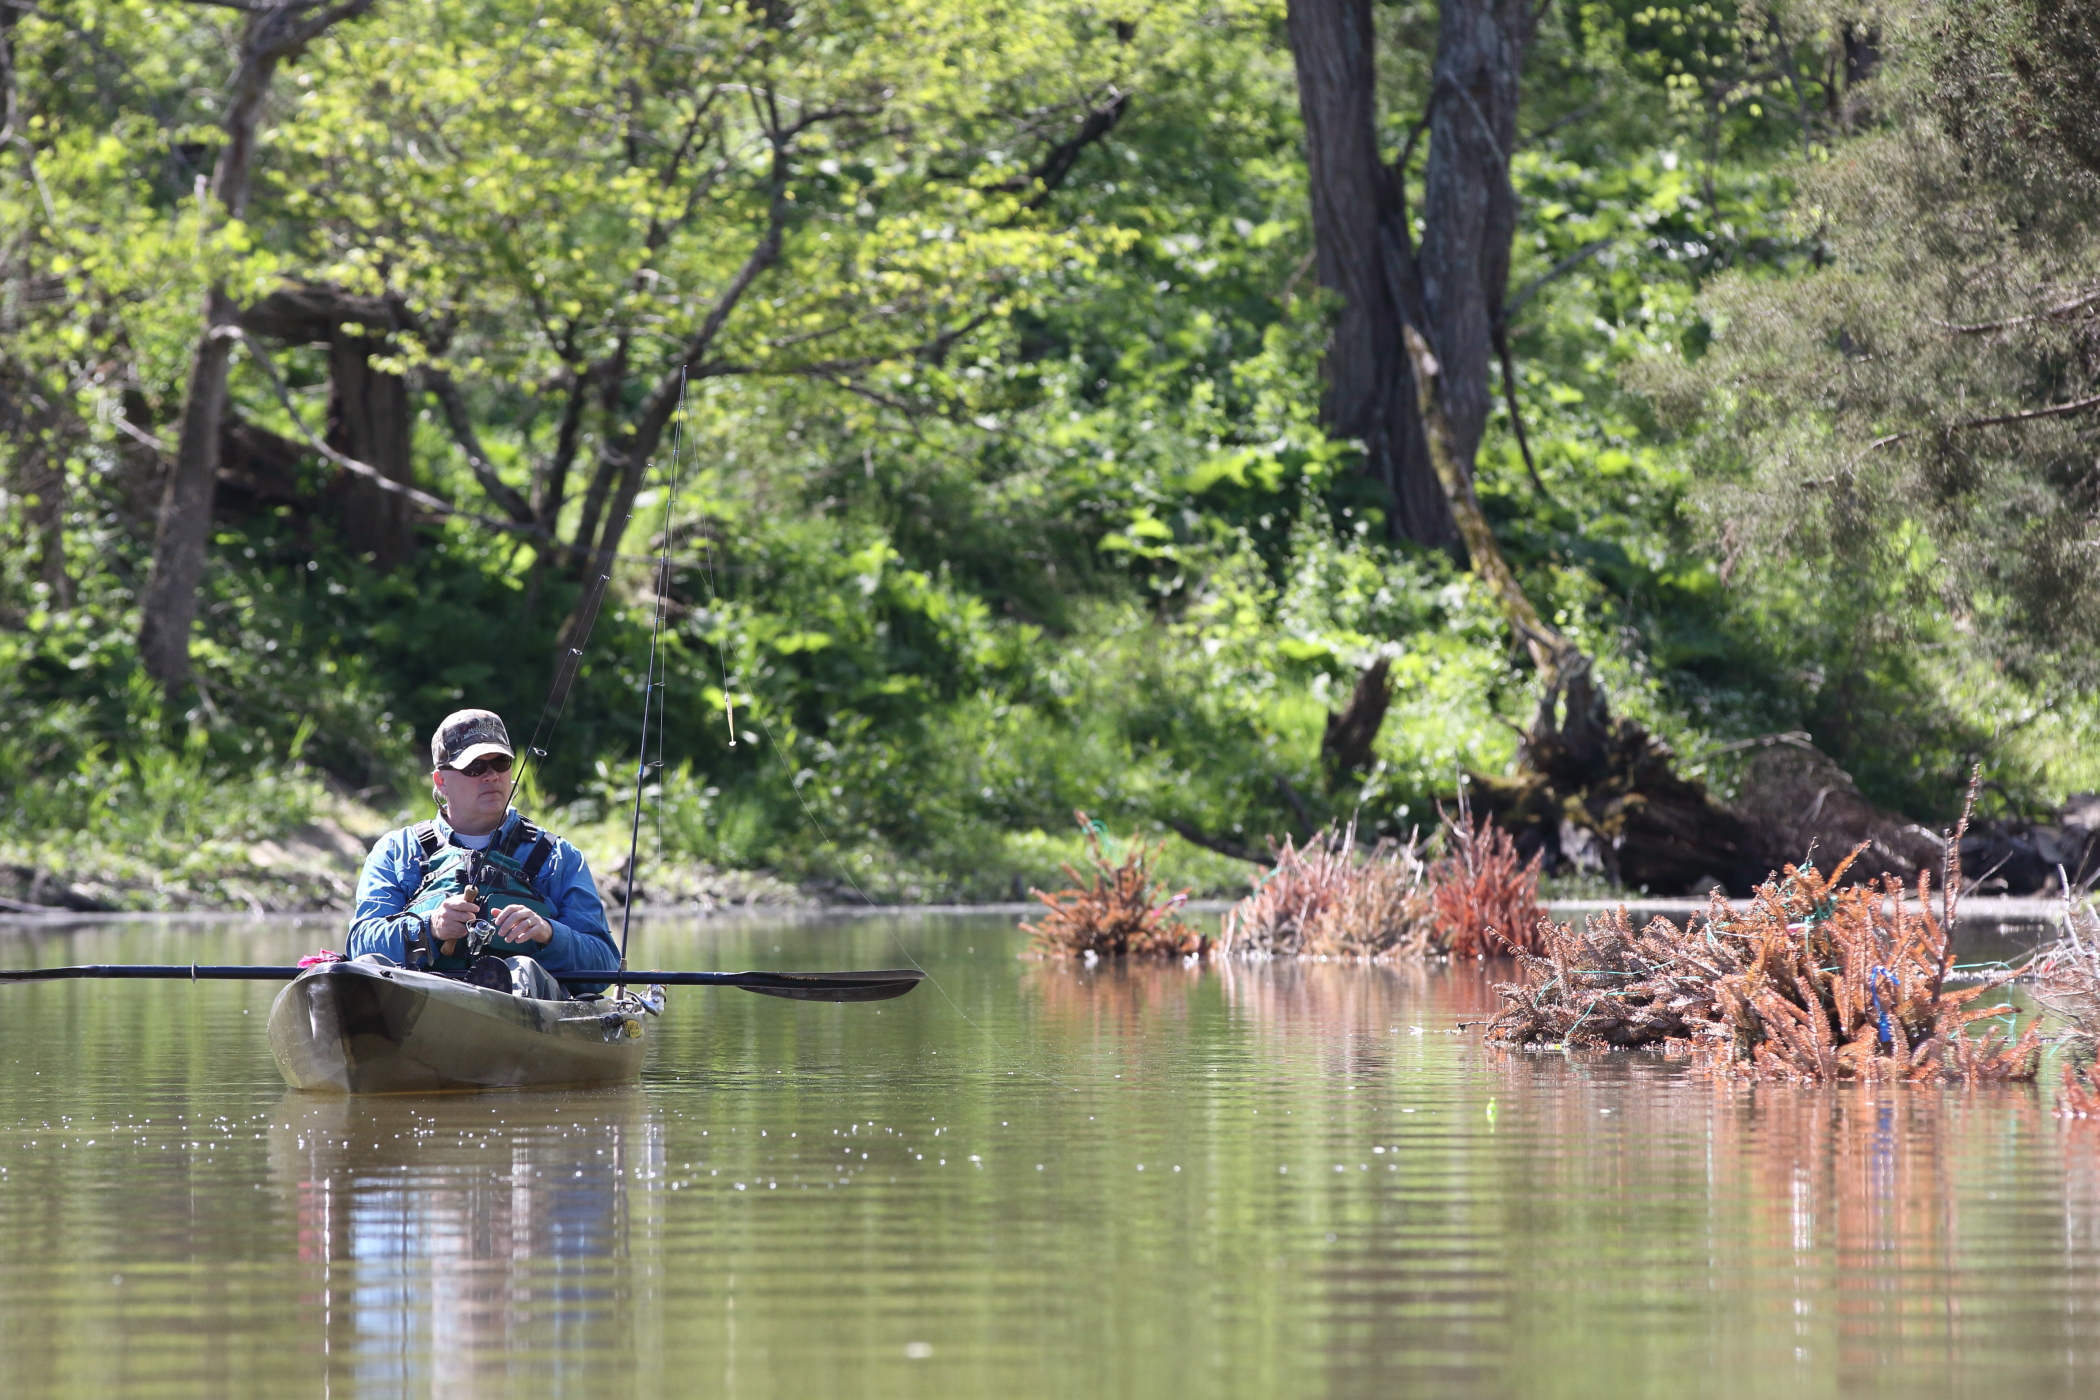 A man is seated in a kayak casting a fishing line in a stream